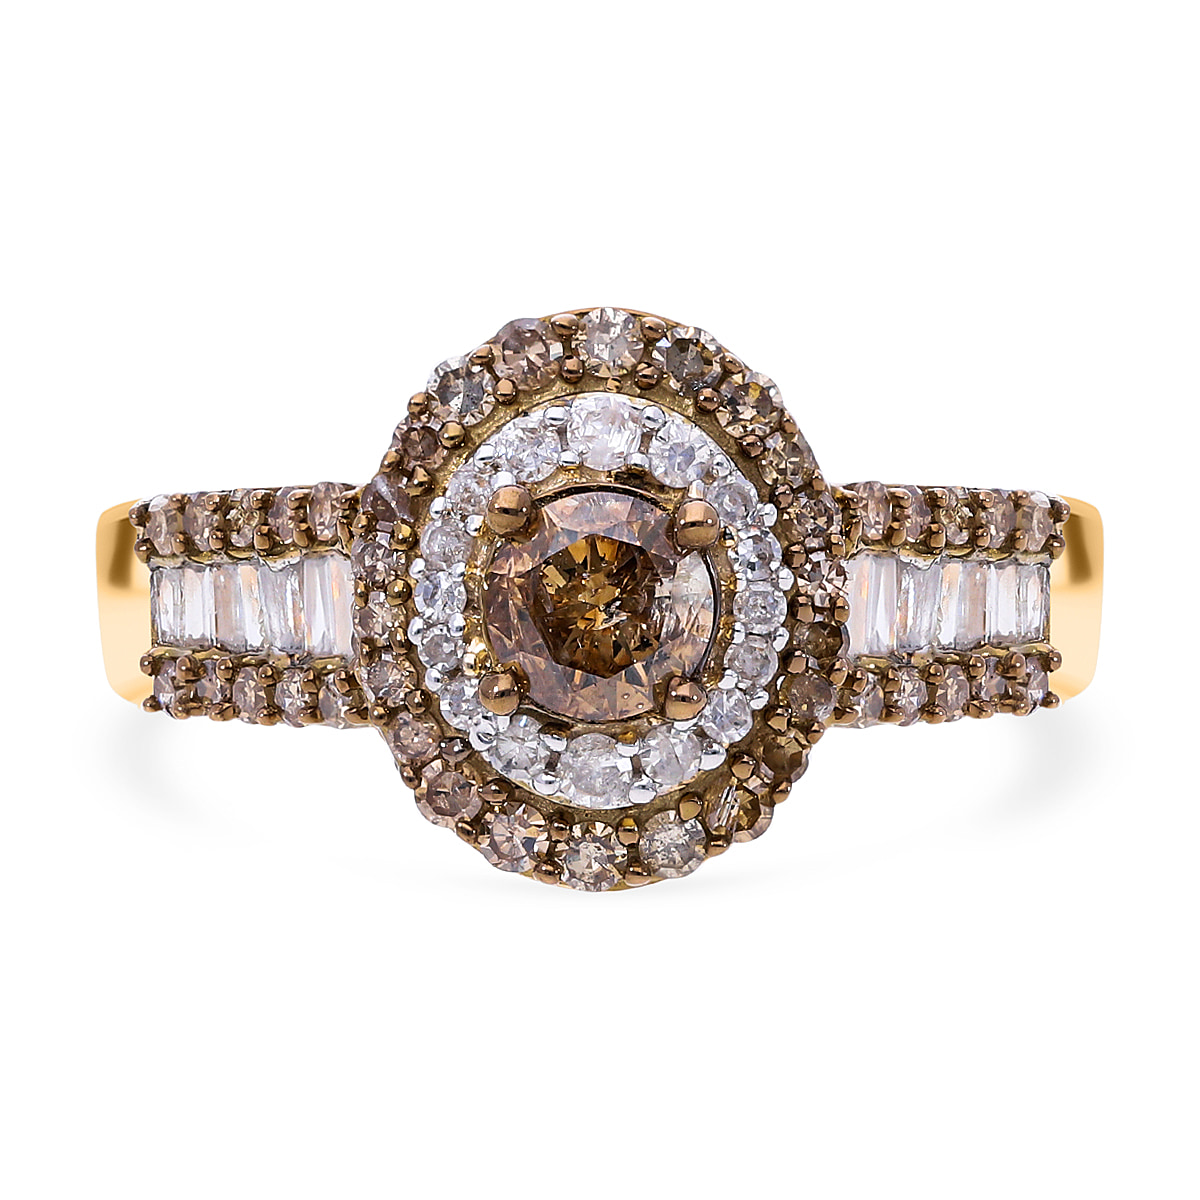 Doorbuster - 9K Yellow Gold SGL Certified Natural Champagne and White Diamond Ring 1.00 ct (Center Stone 0.36cts)